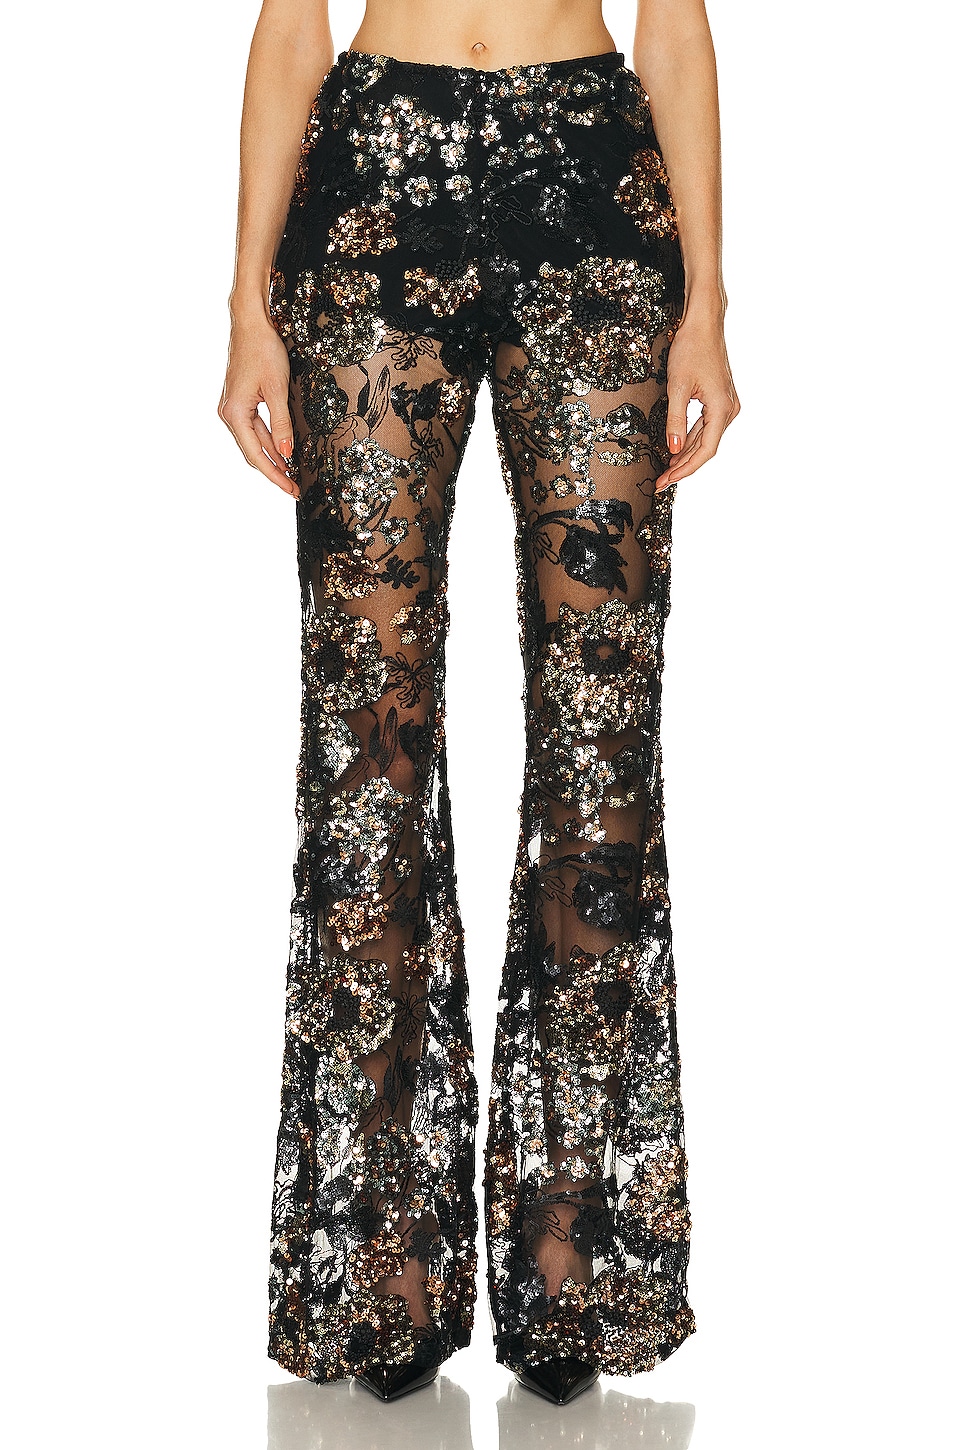 Lenno Embroidered Pants in Metallic Neutral